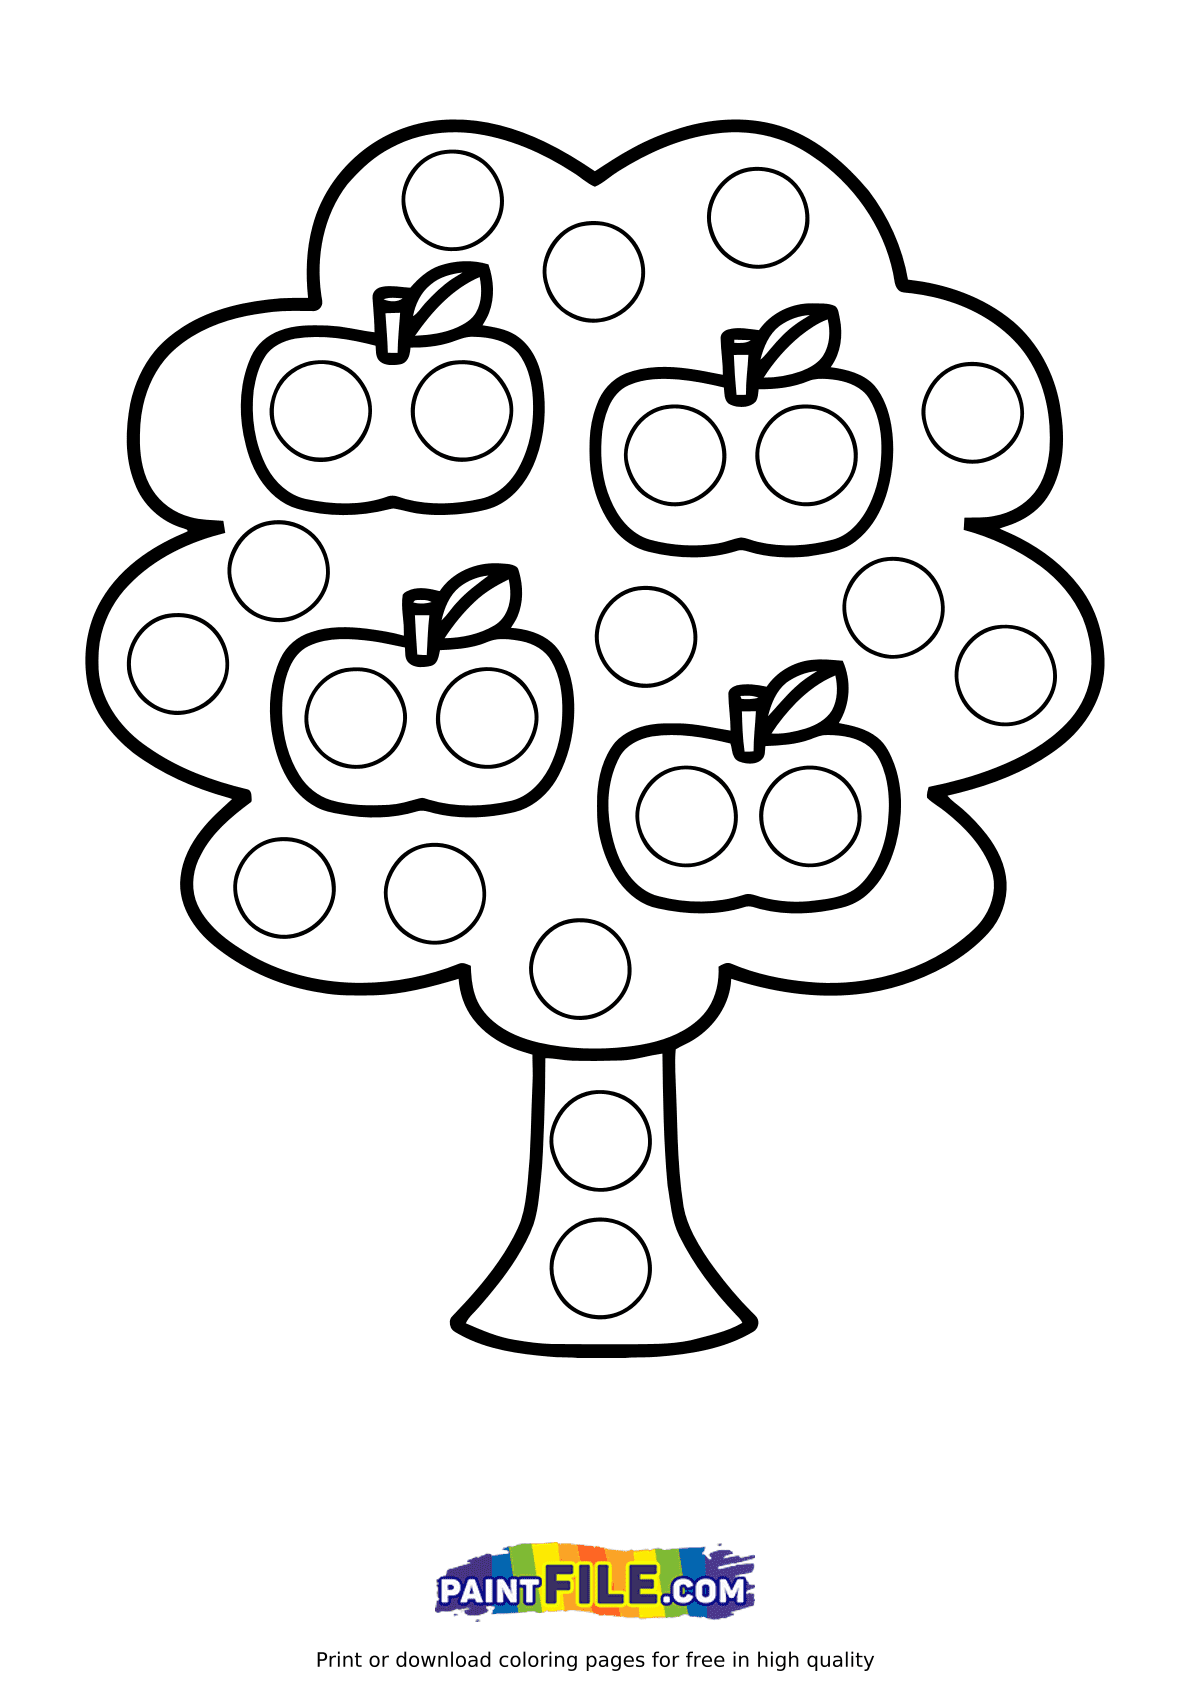 Pop It Apple Tree Coloring Page